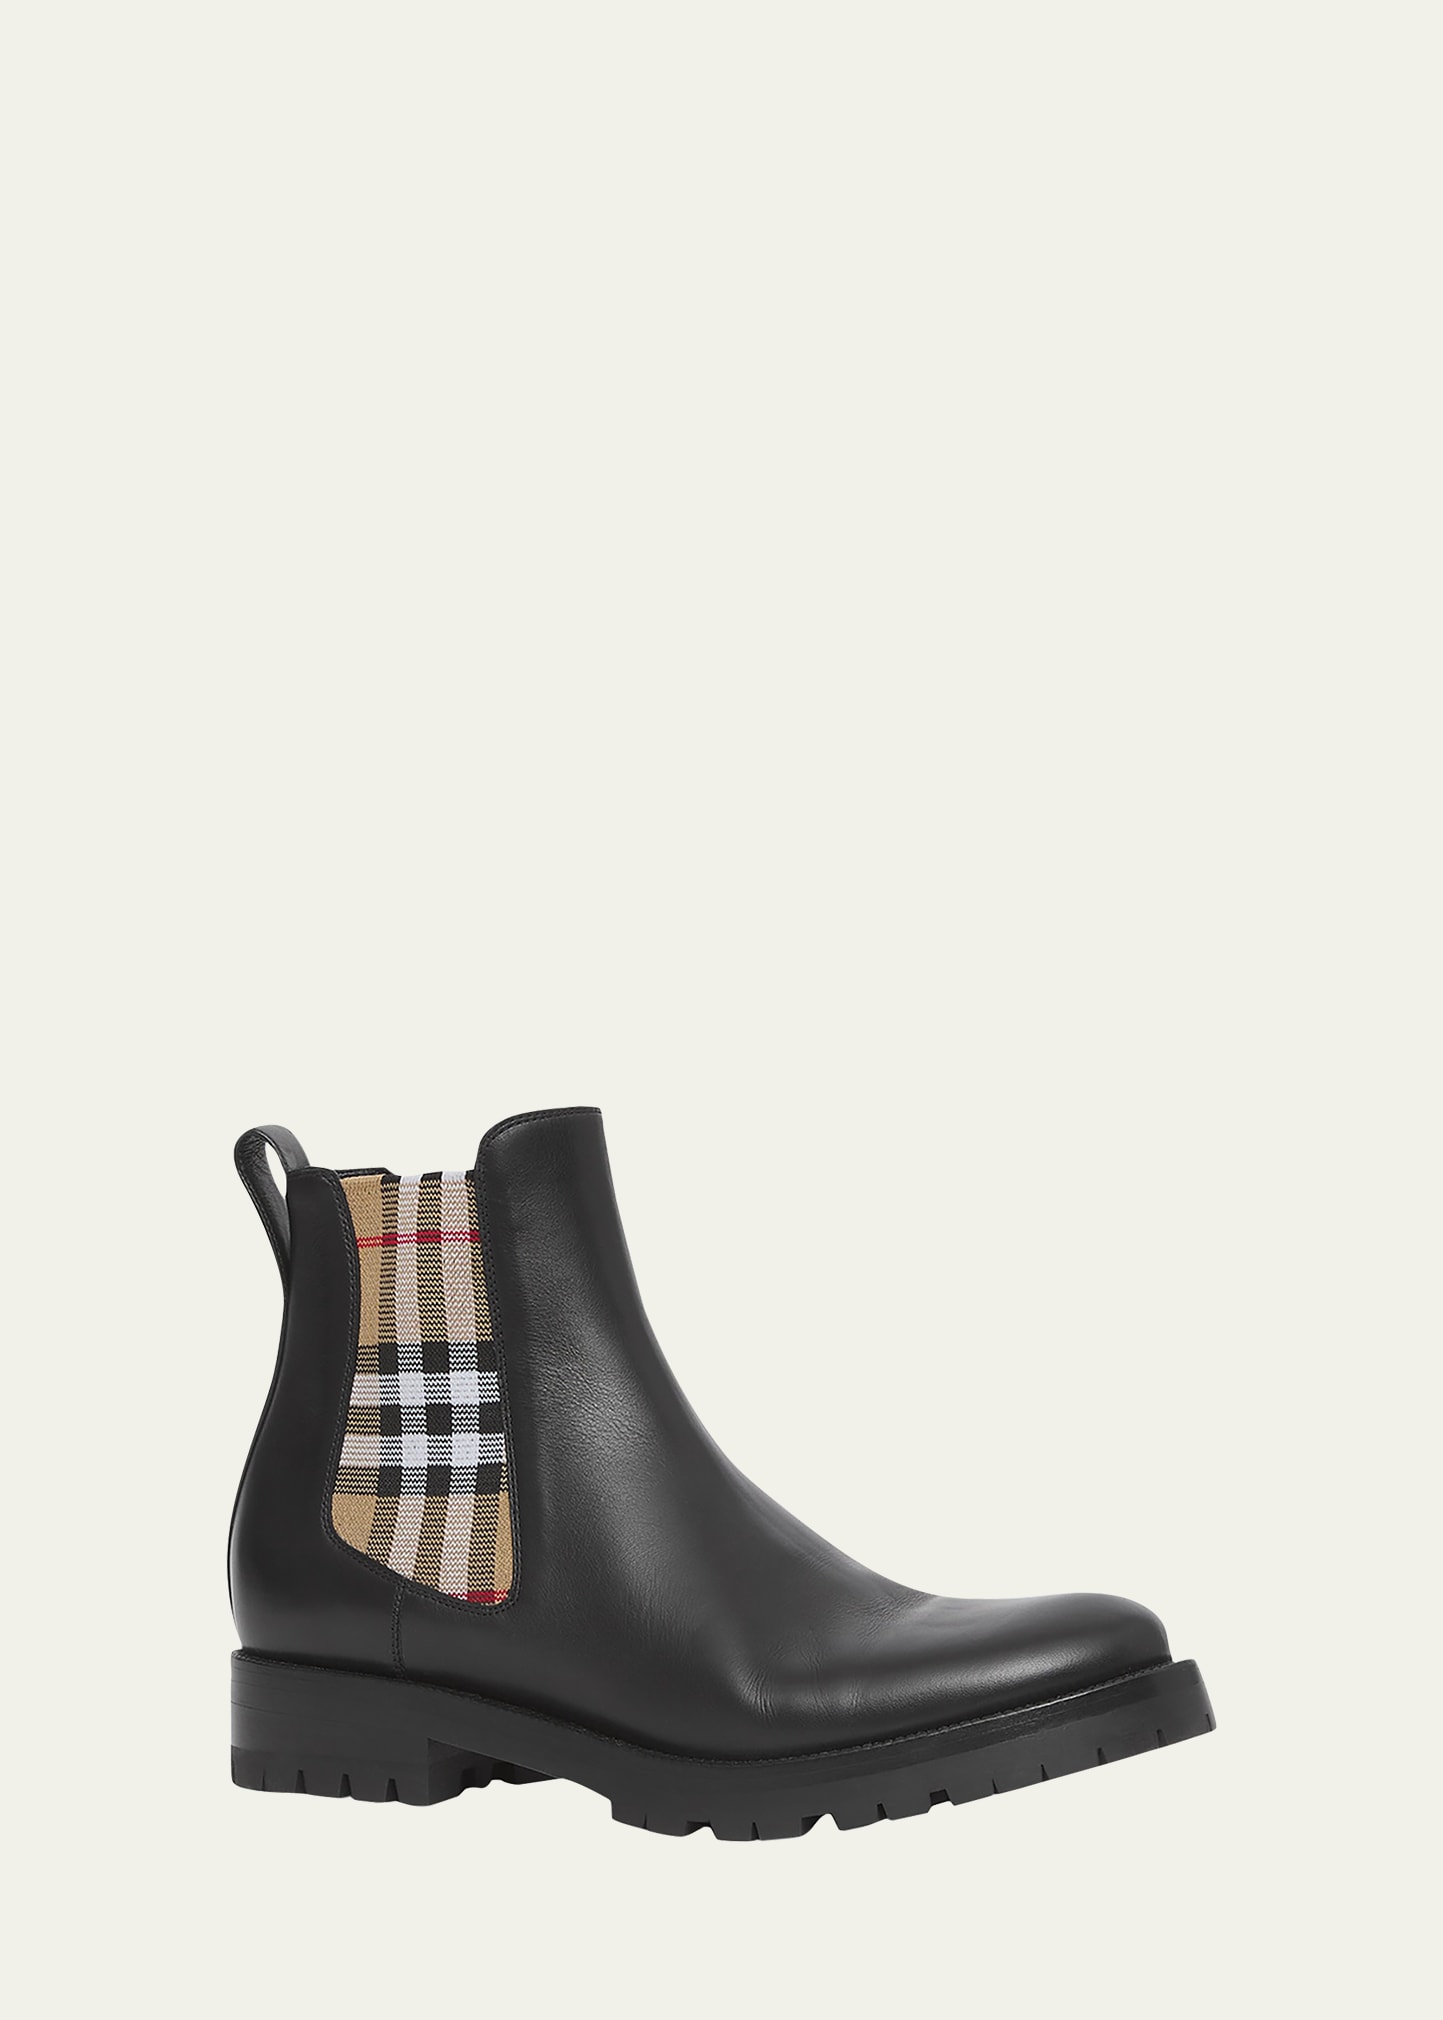 Allostock Leather Vintage Check Chelsea Booties